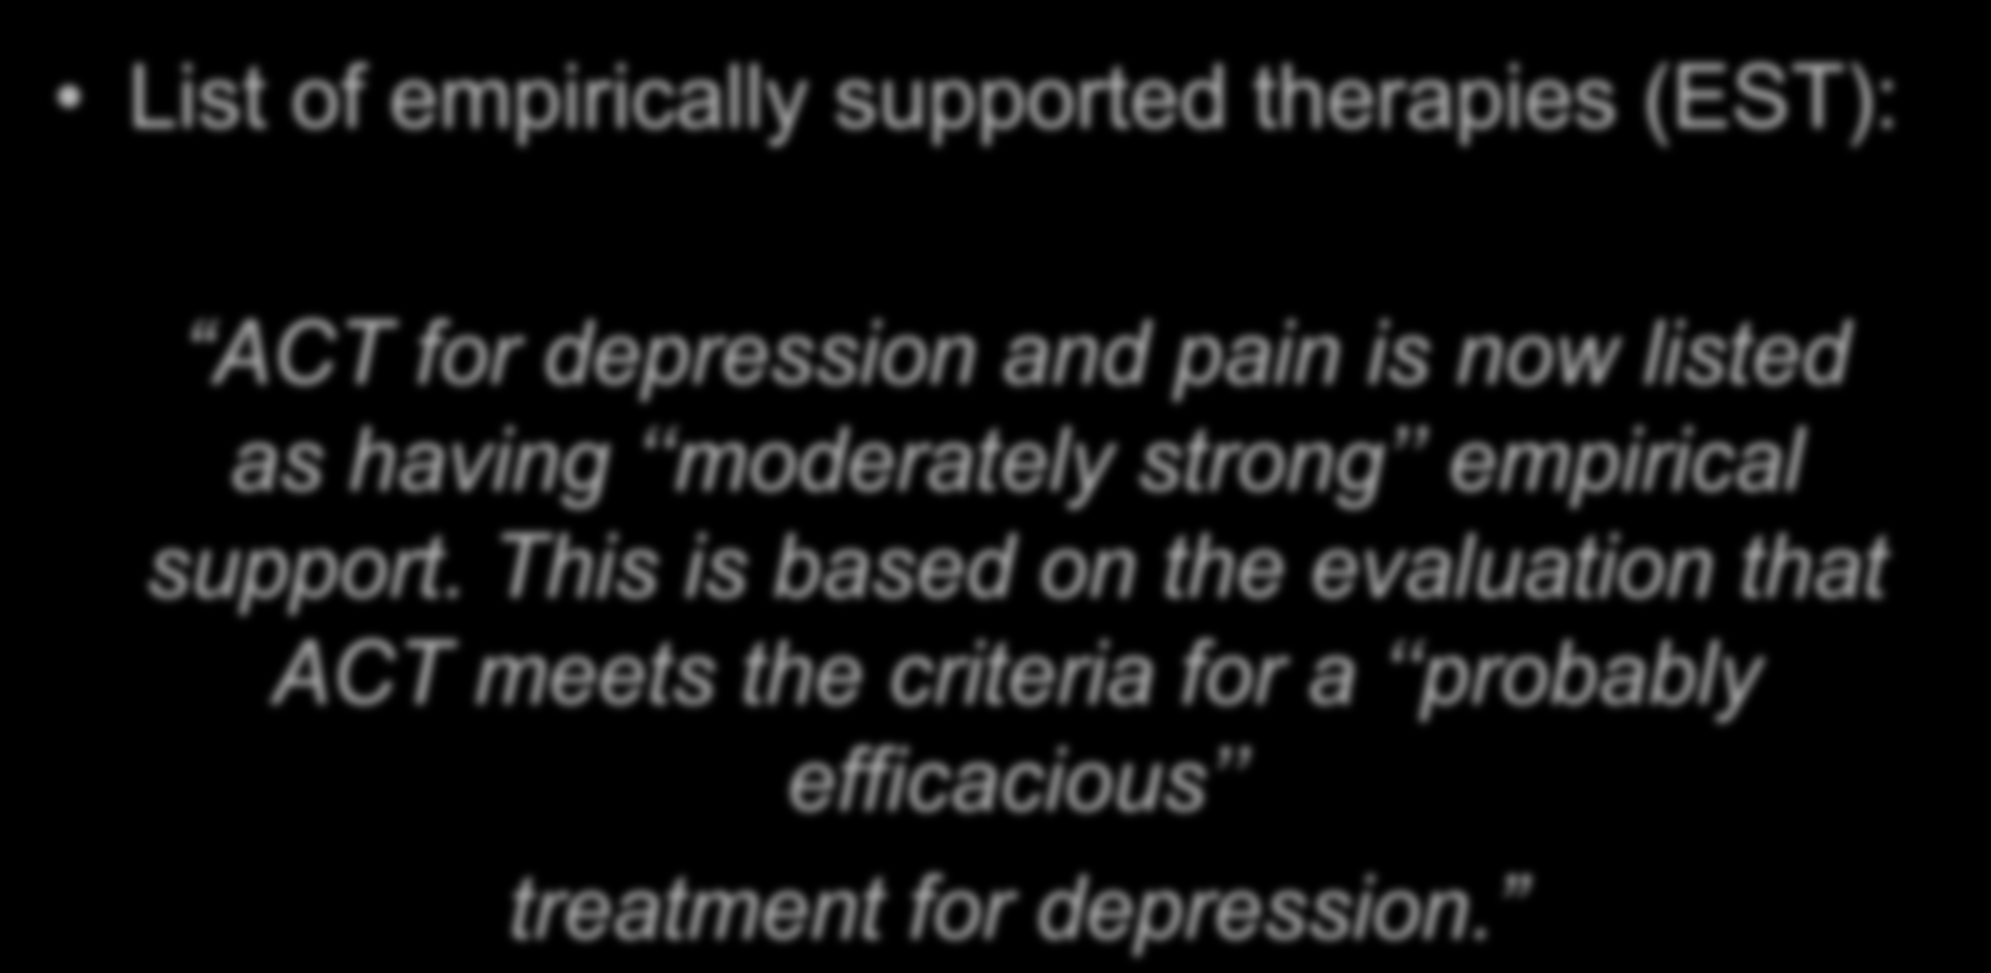 American Psychological Association (APA) List of empirically supported therapies (EST): ACT for depression and pain is now listed as having